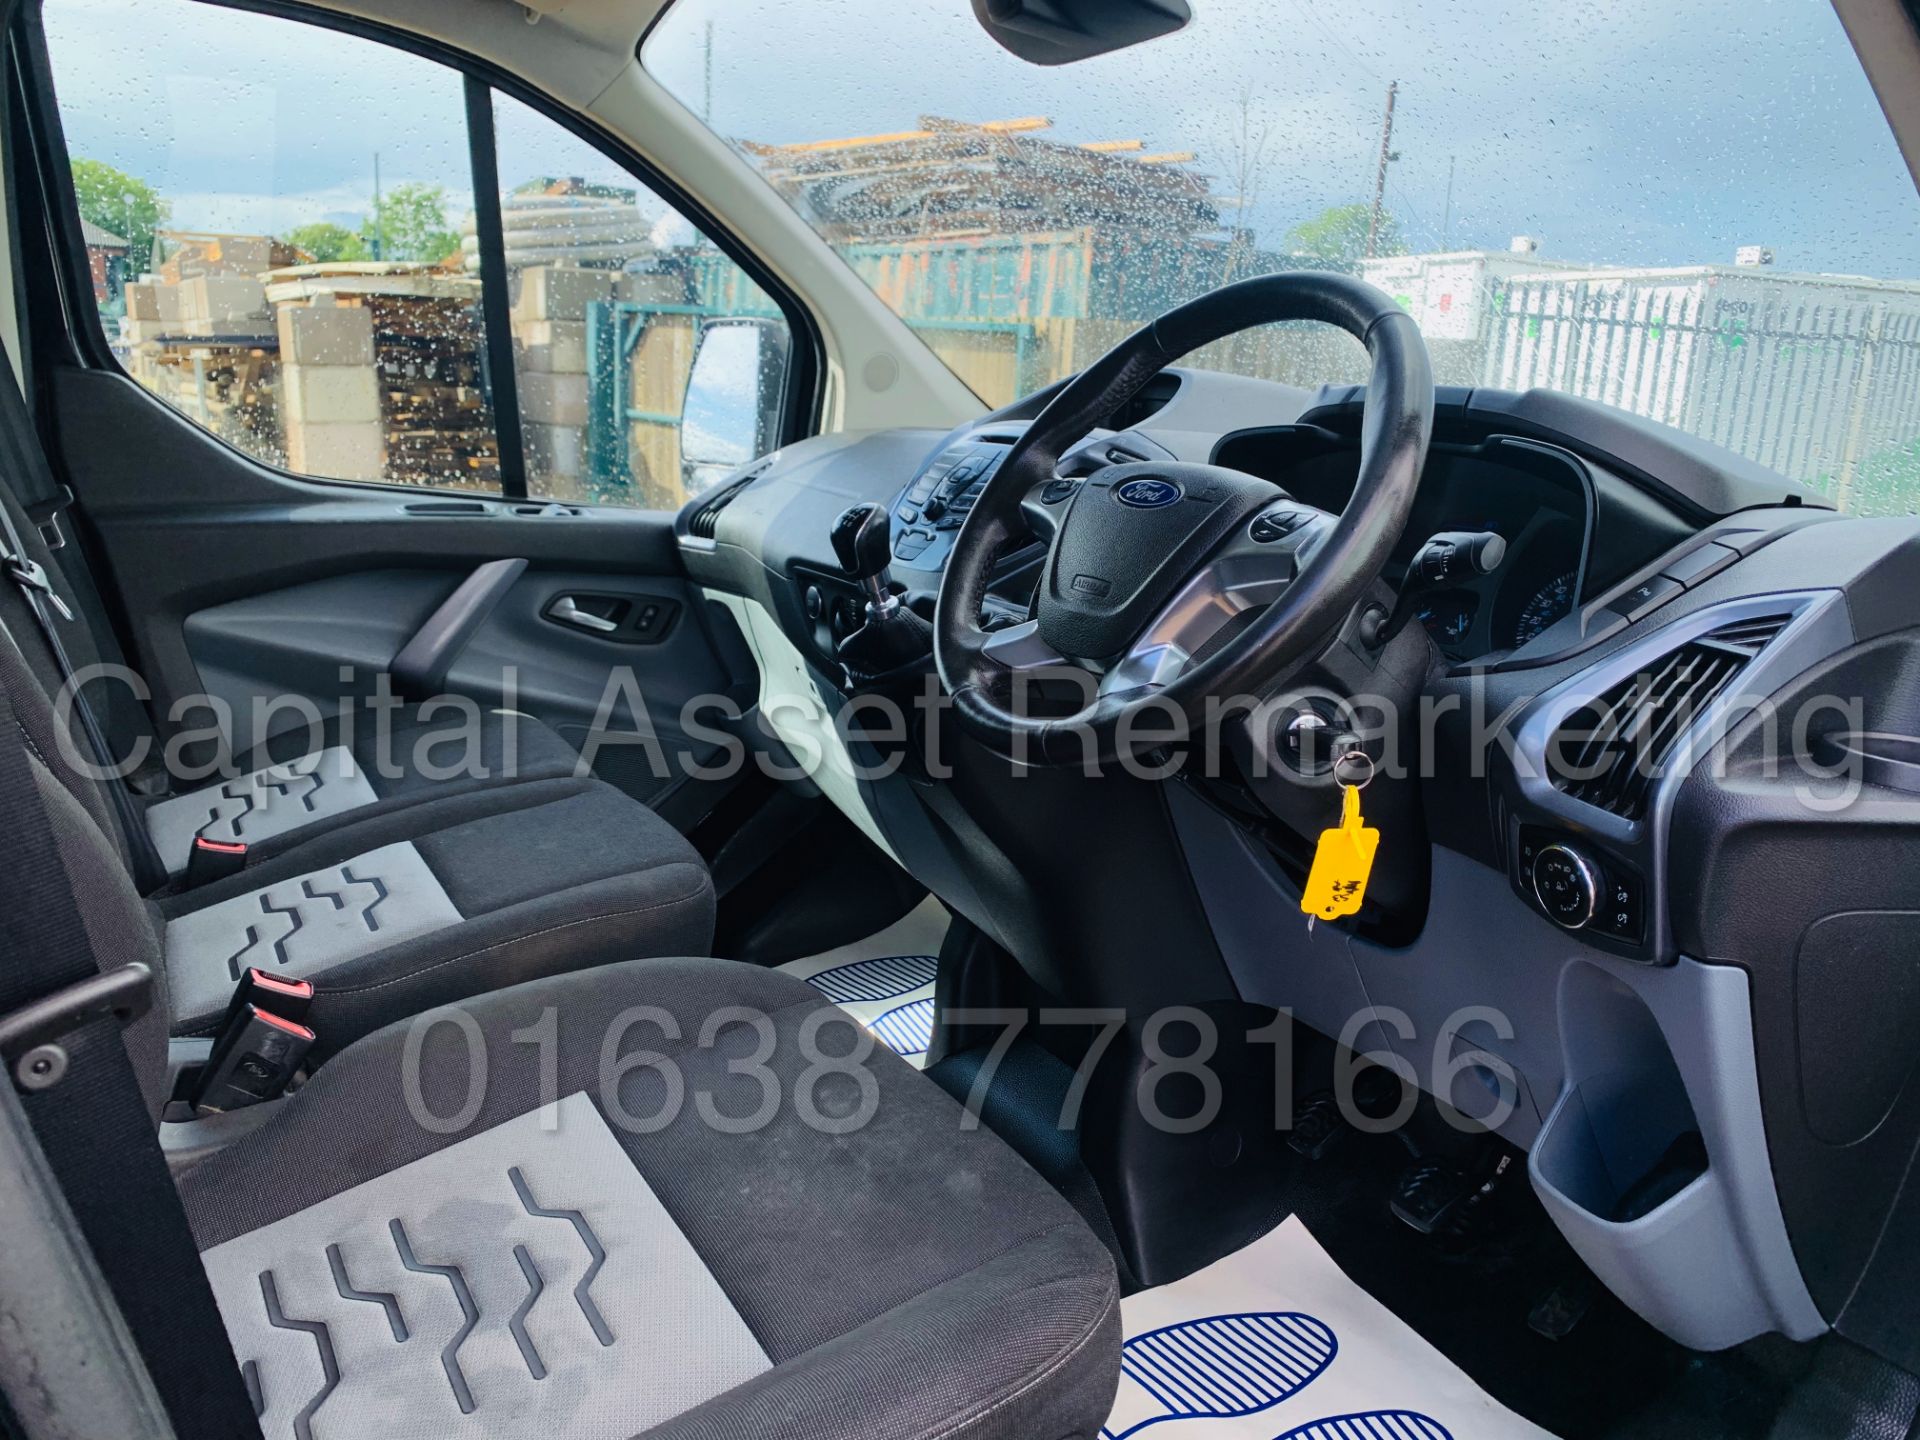 On Sale FORD TRANSIT CUSTOM *LIMITED* (2018 - EURO 6) '2.0 TDCI - 130 BHP - 6 SPEED' **LOW MILES** - Image 31 of 44